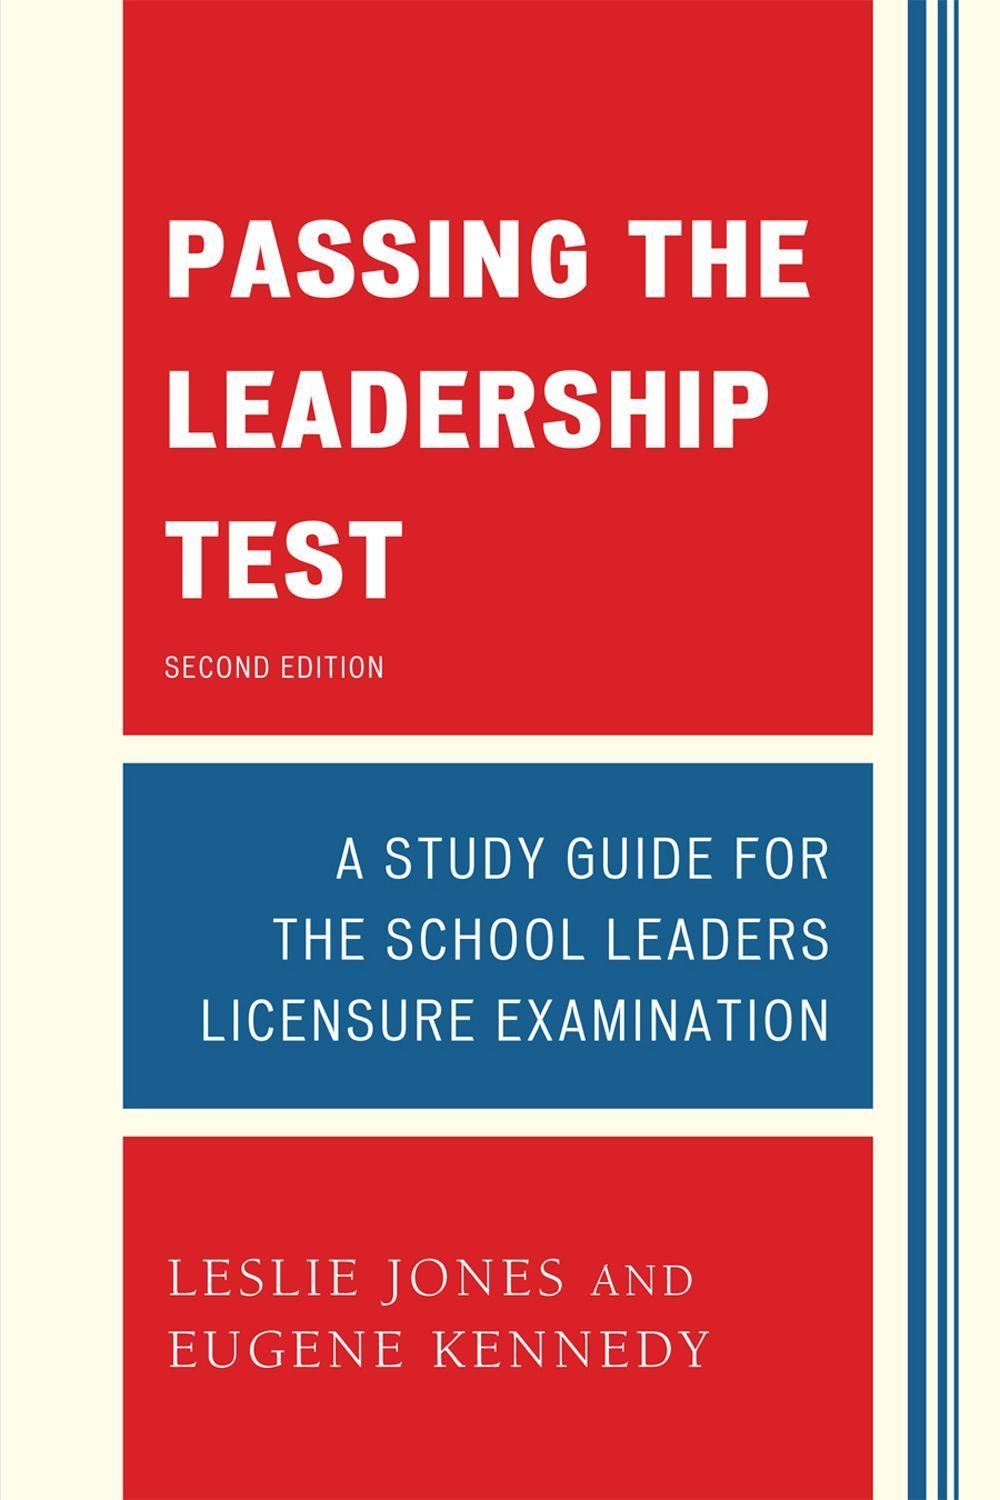 Passing the Leadership Test